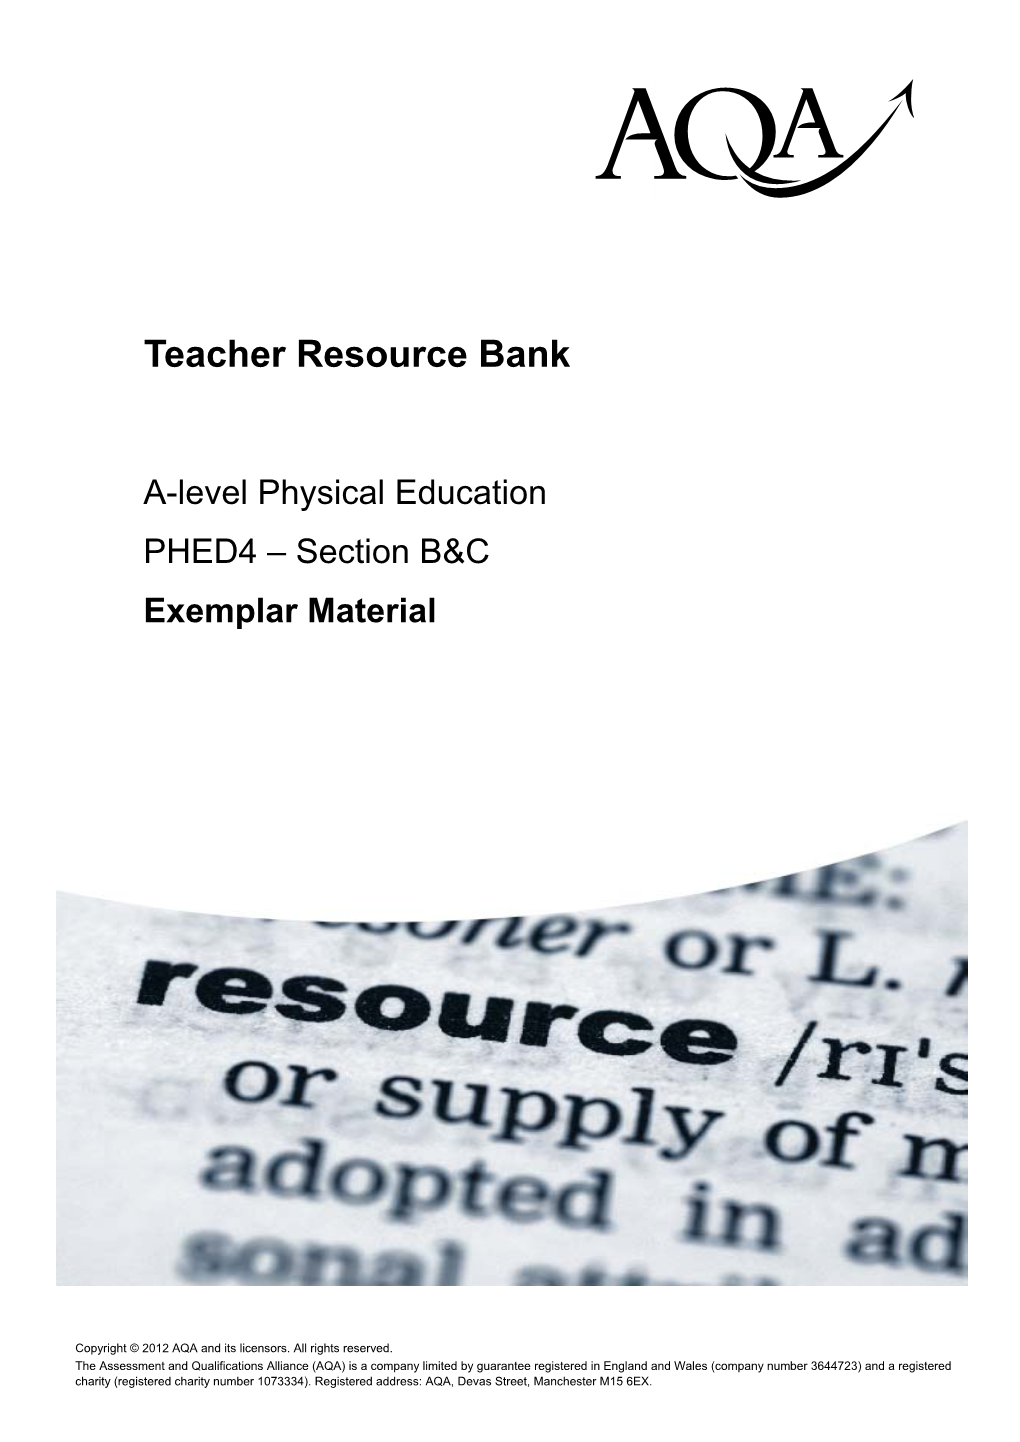 A Level Physical Education Teacher Resource Bank Sections B and C